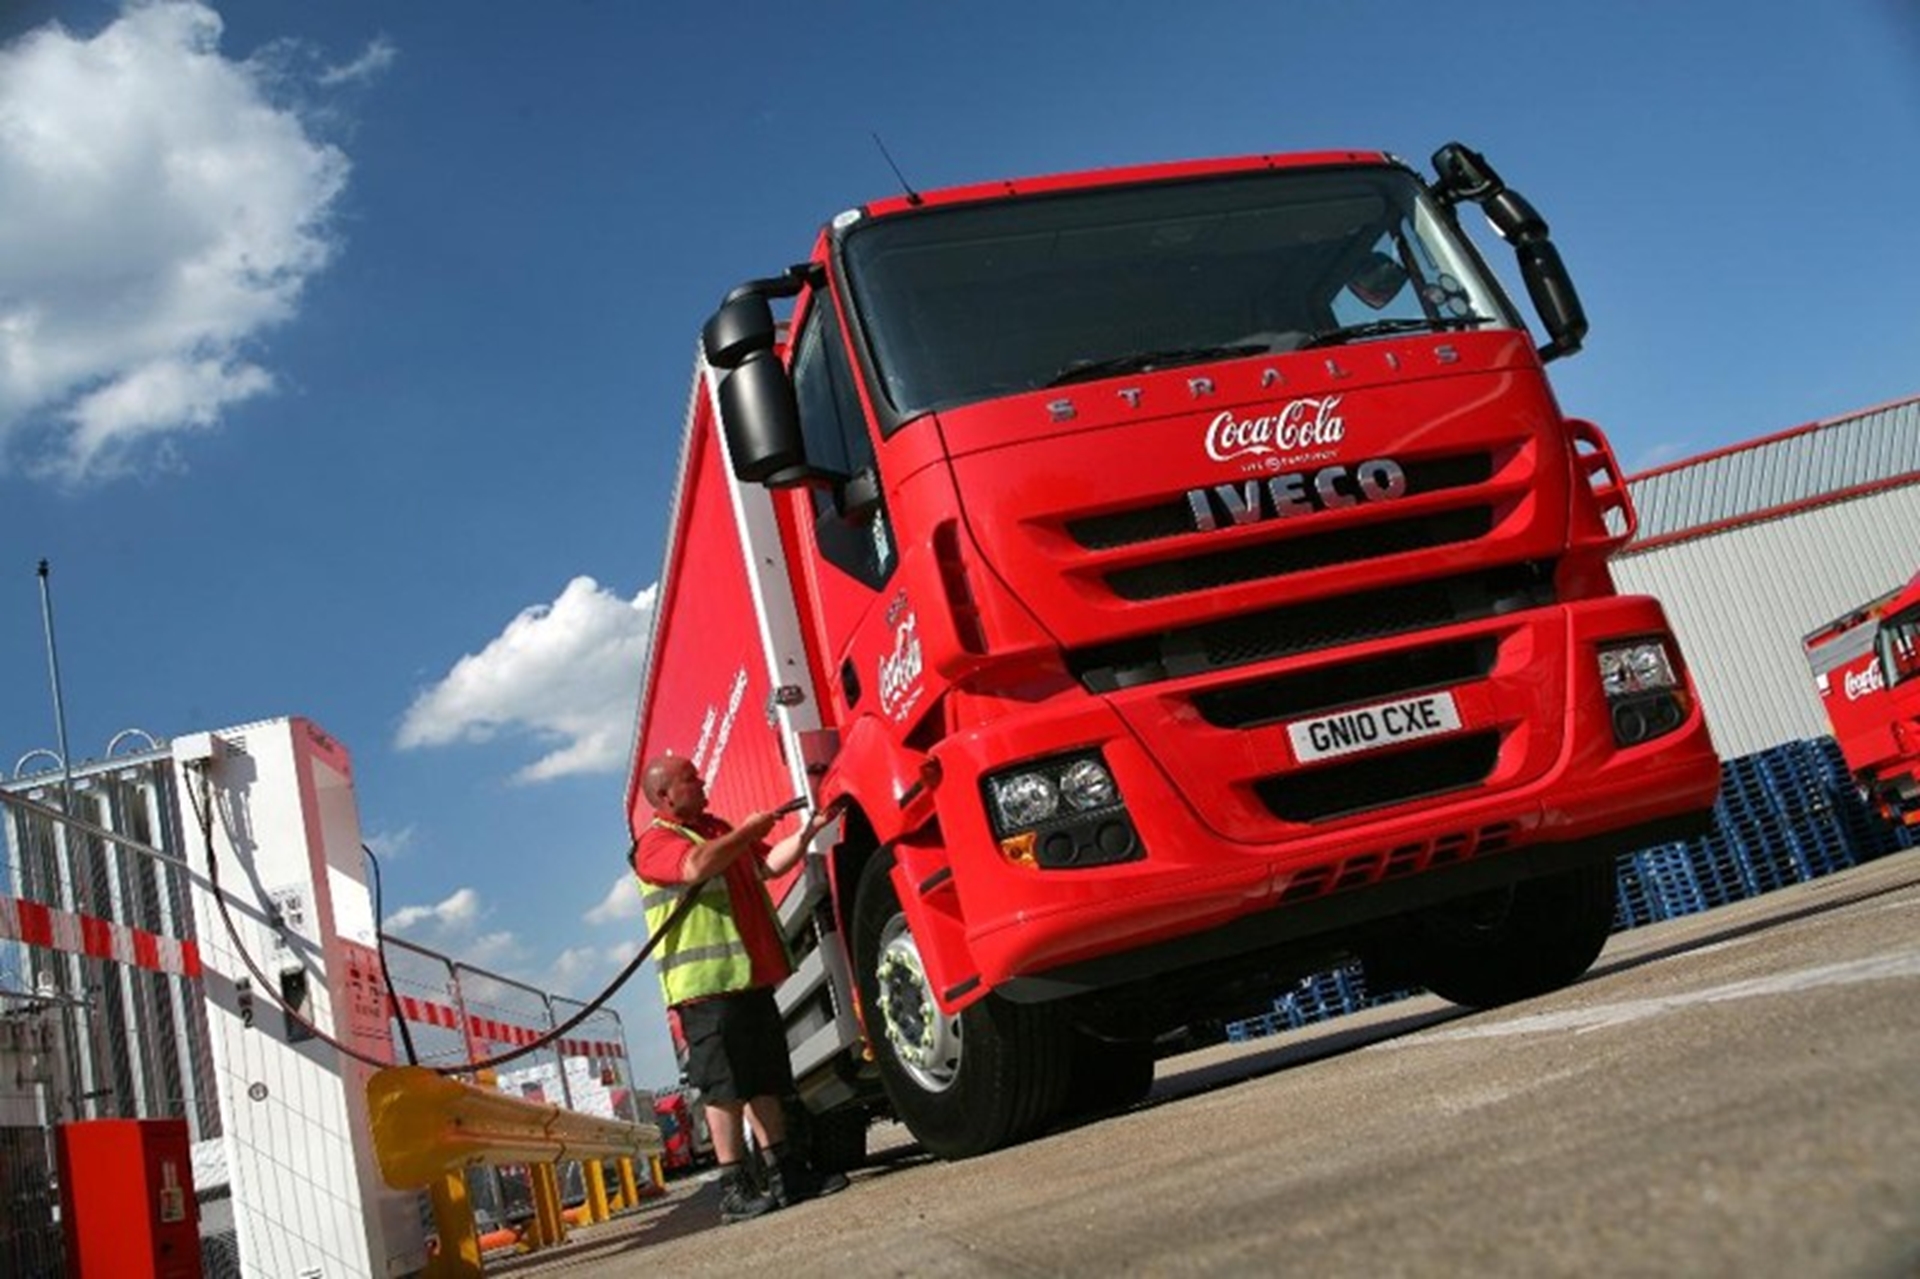 IVECO NAMED LOW CARBON HEAVY DUTY VEHICLE MANUFACTURER OF THE YEAR 2011